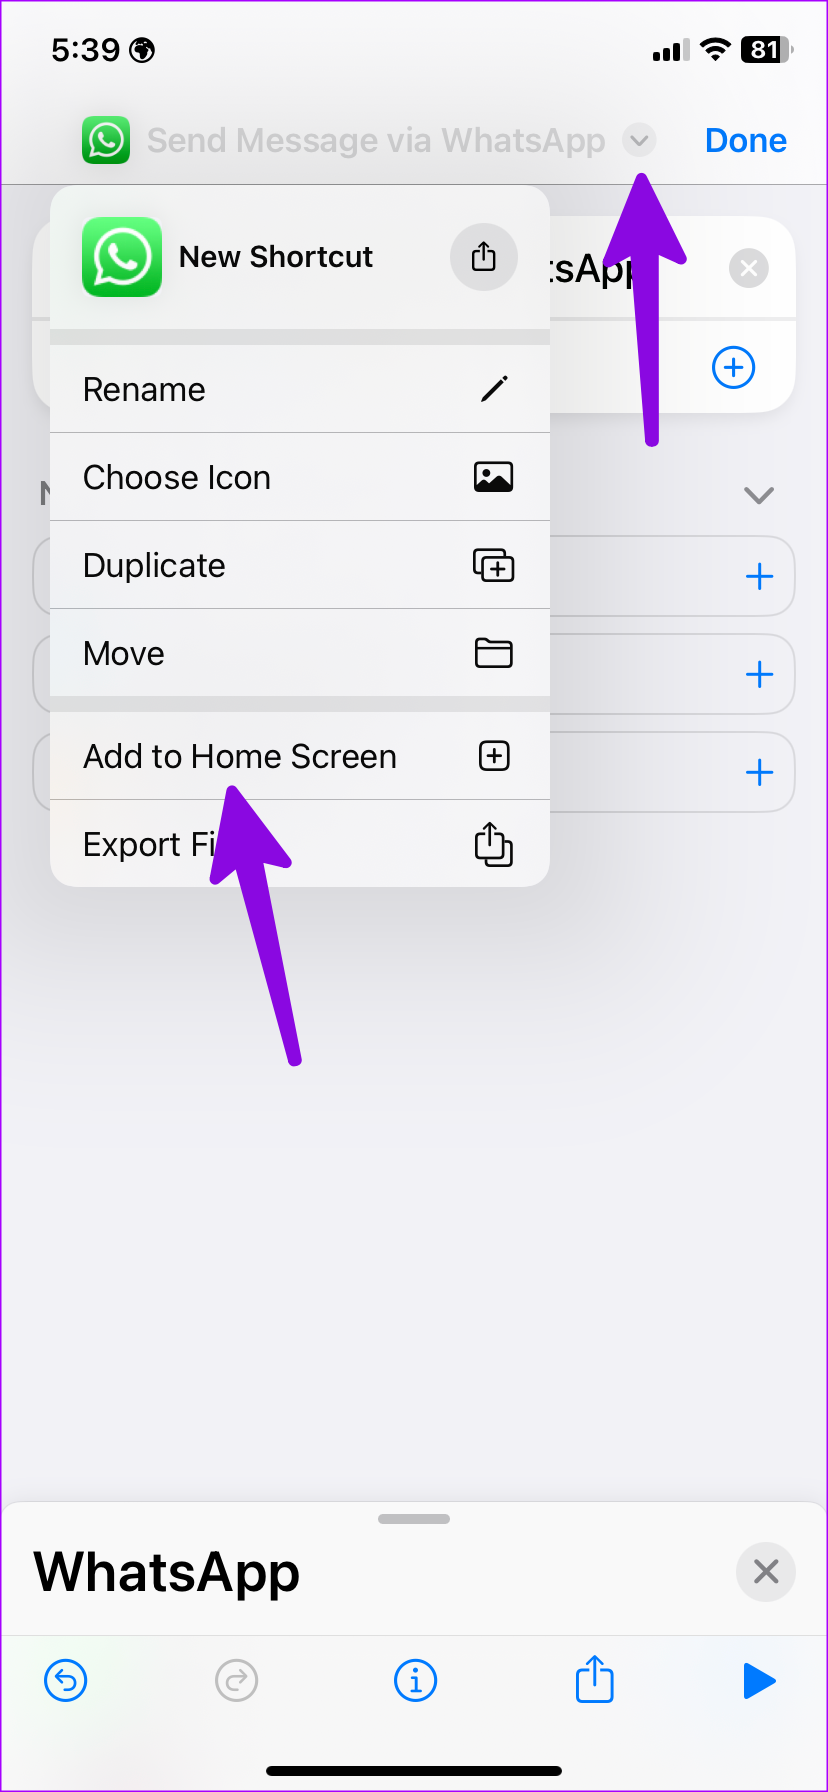 Select Add to Home Screen